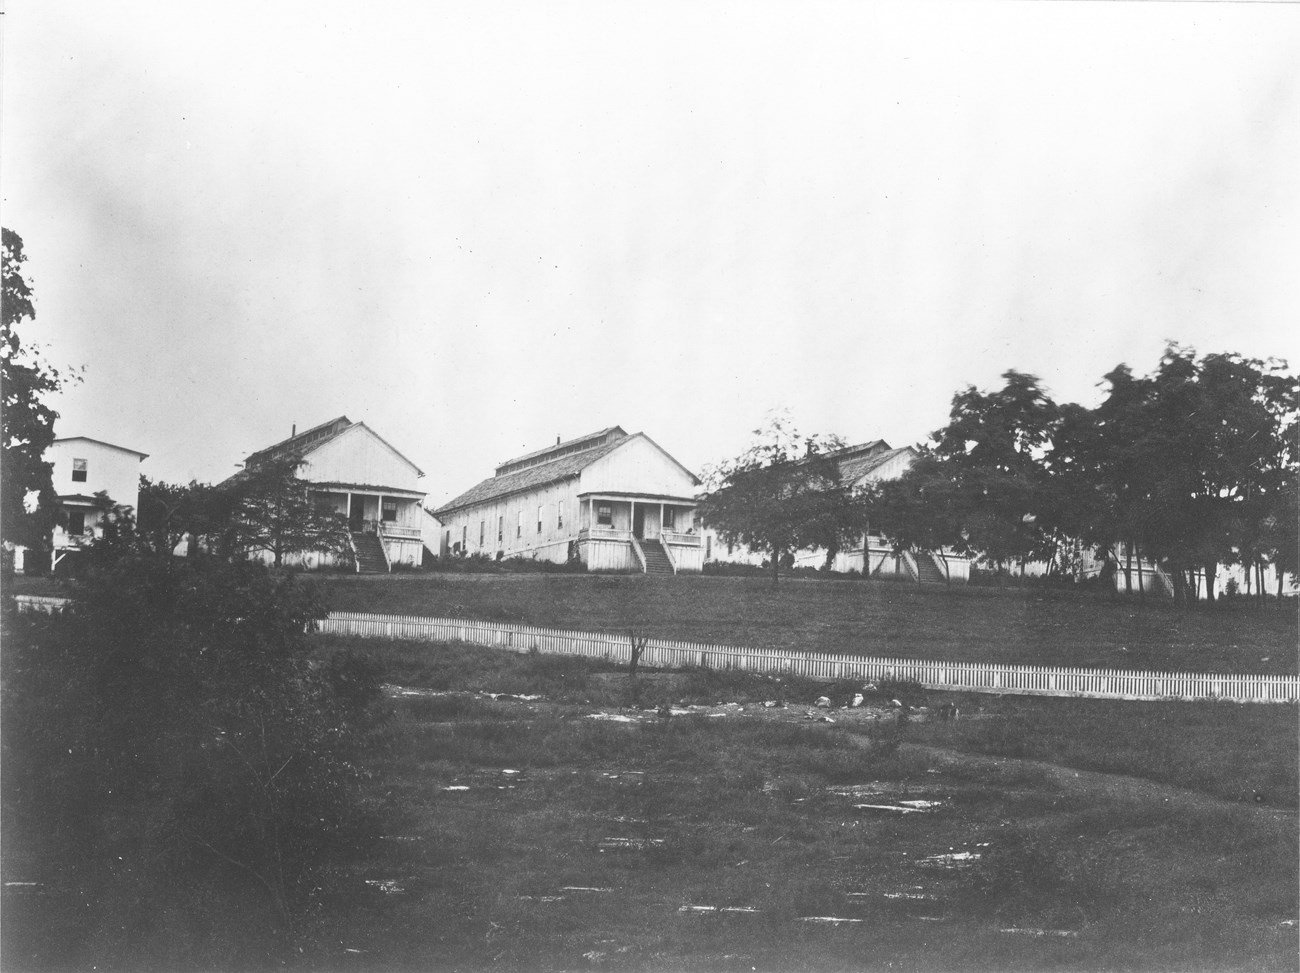 Rectangular wooden buildings with a field and trees in front during the Civil War.